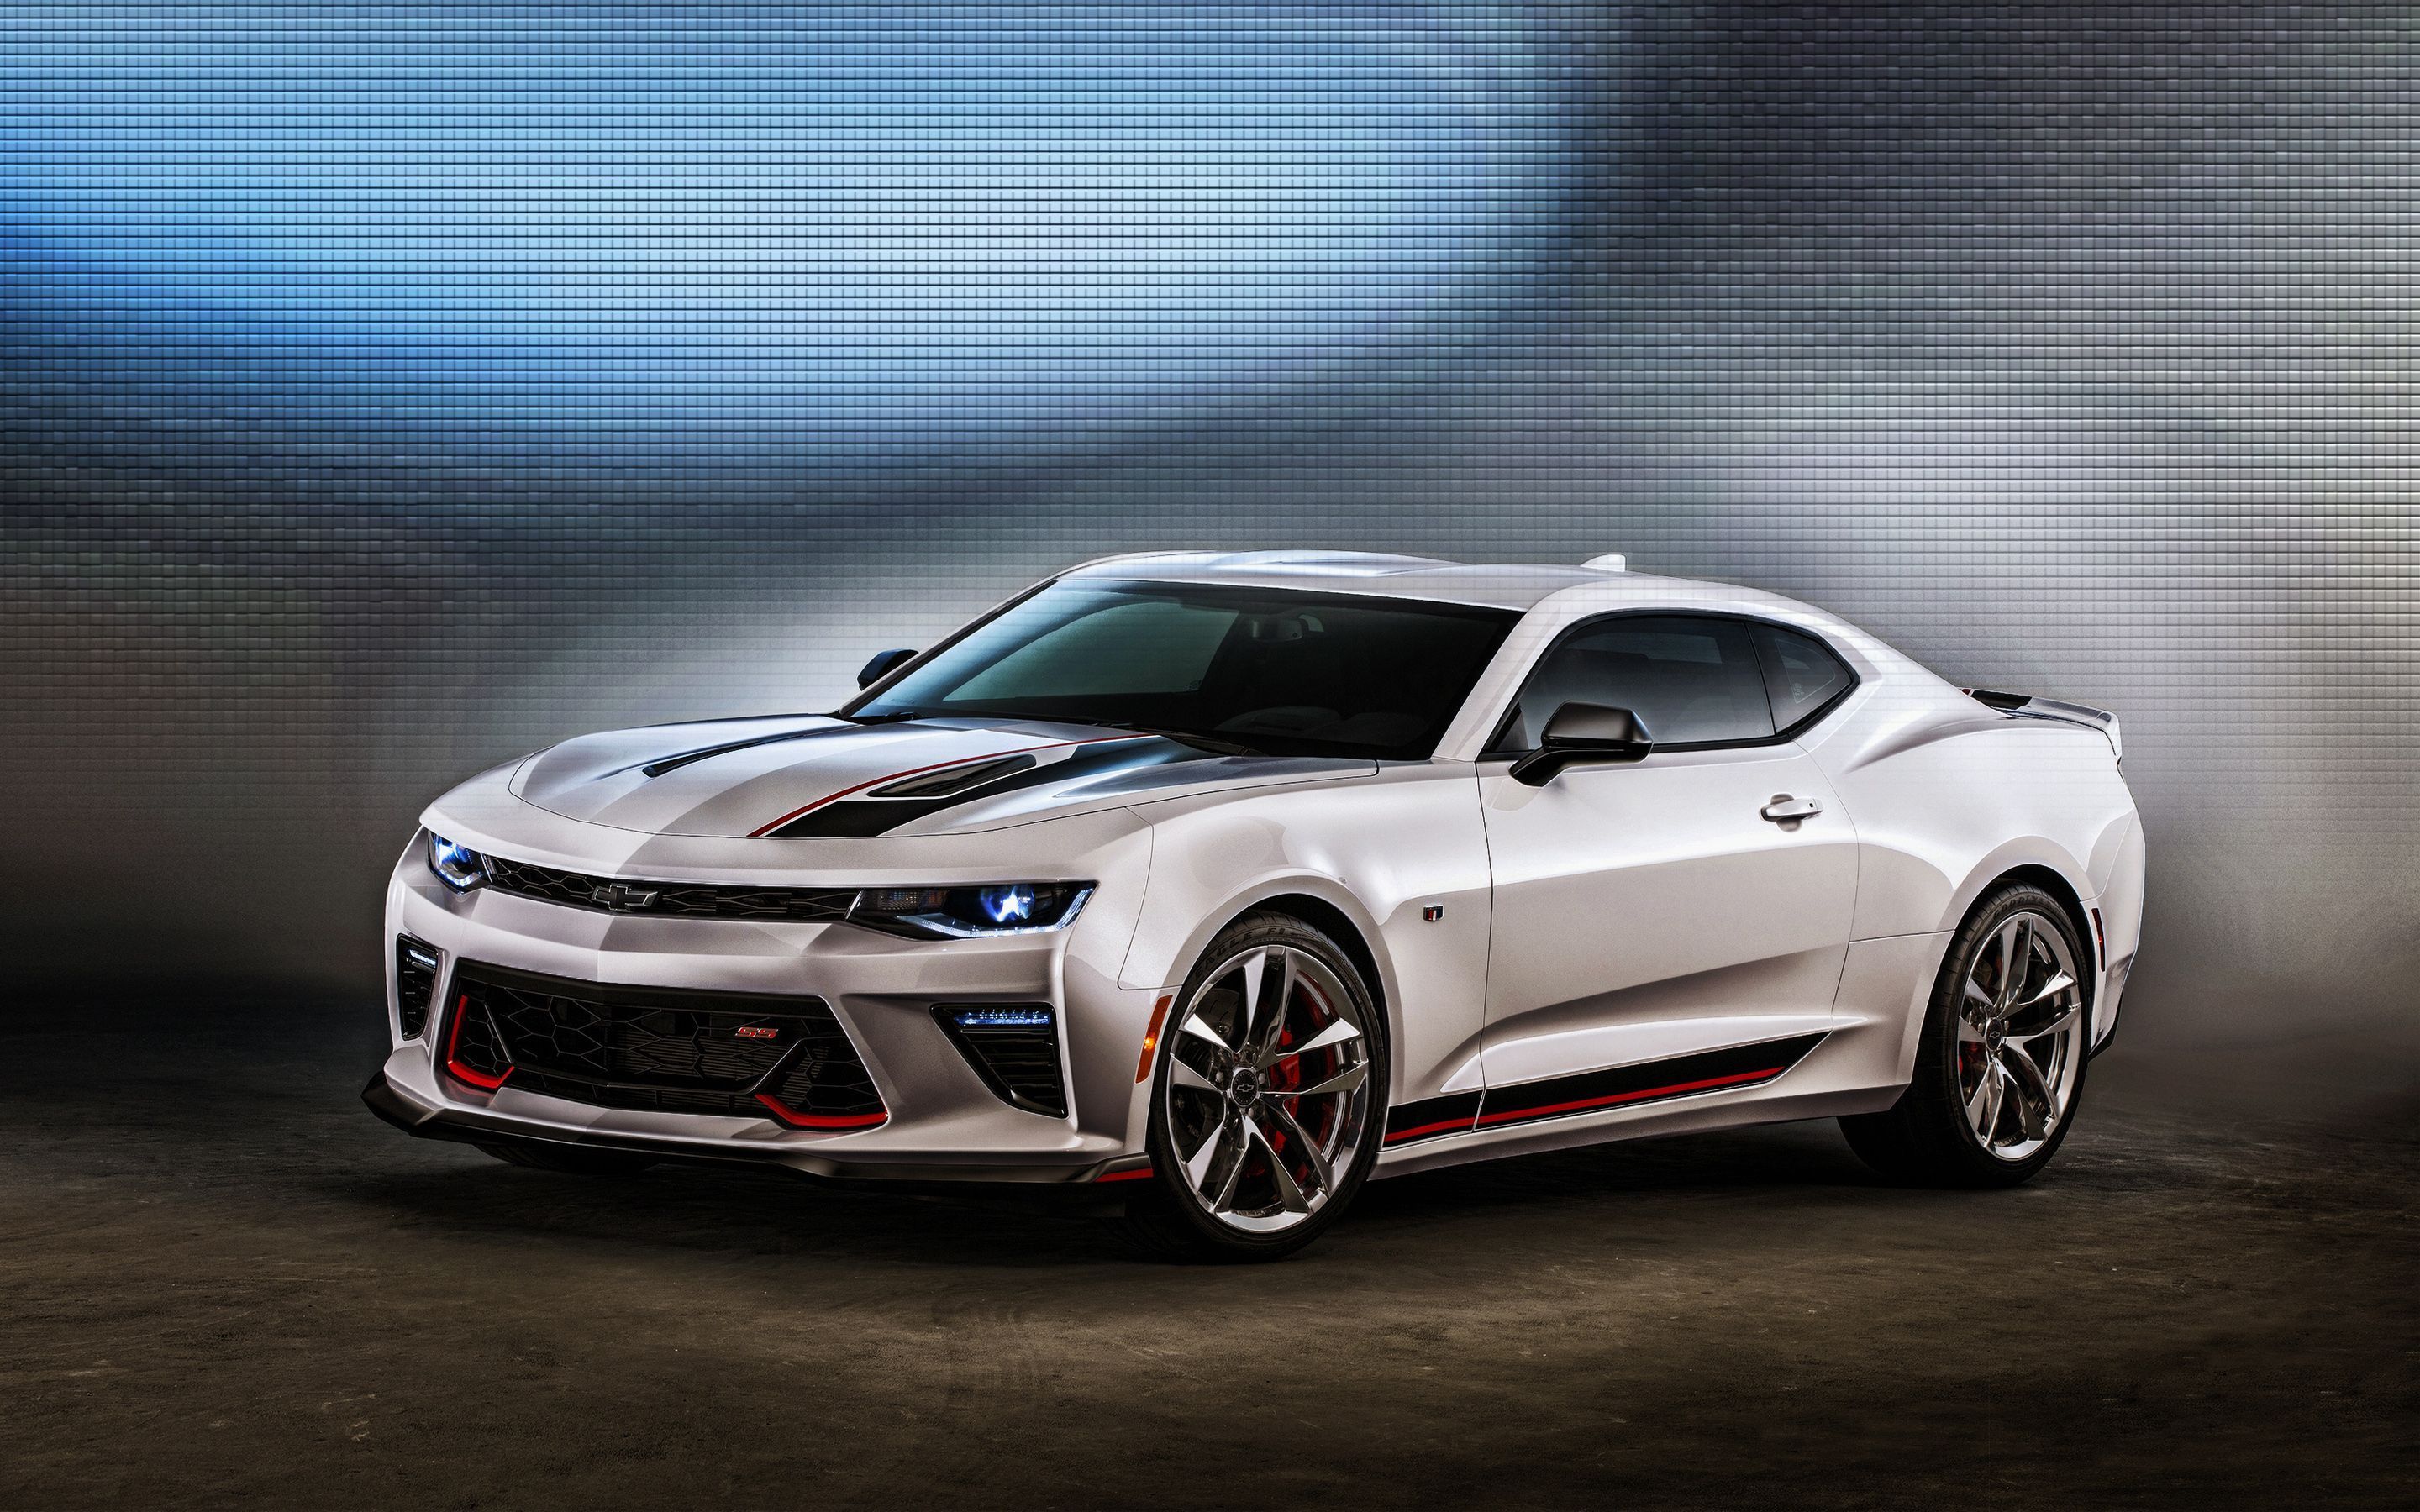 2016 Chevrolet Camaro SS Concept Wallpapers | HD Wallpapers